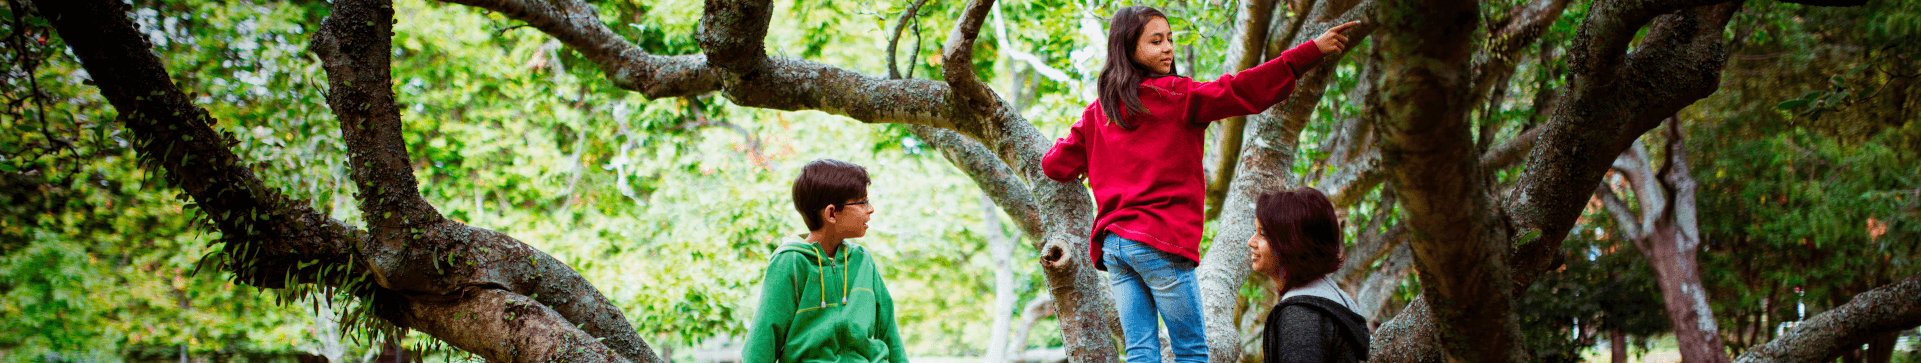 Children playing in tree